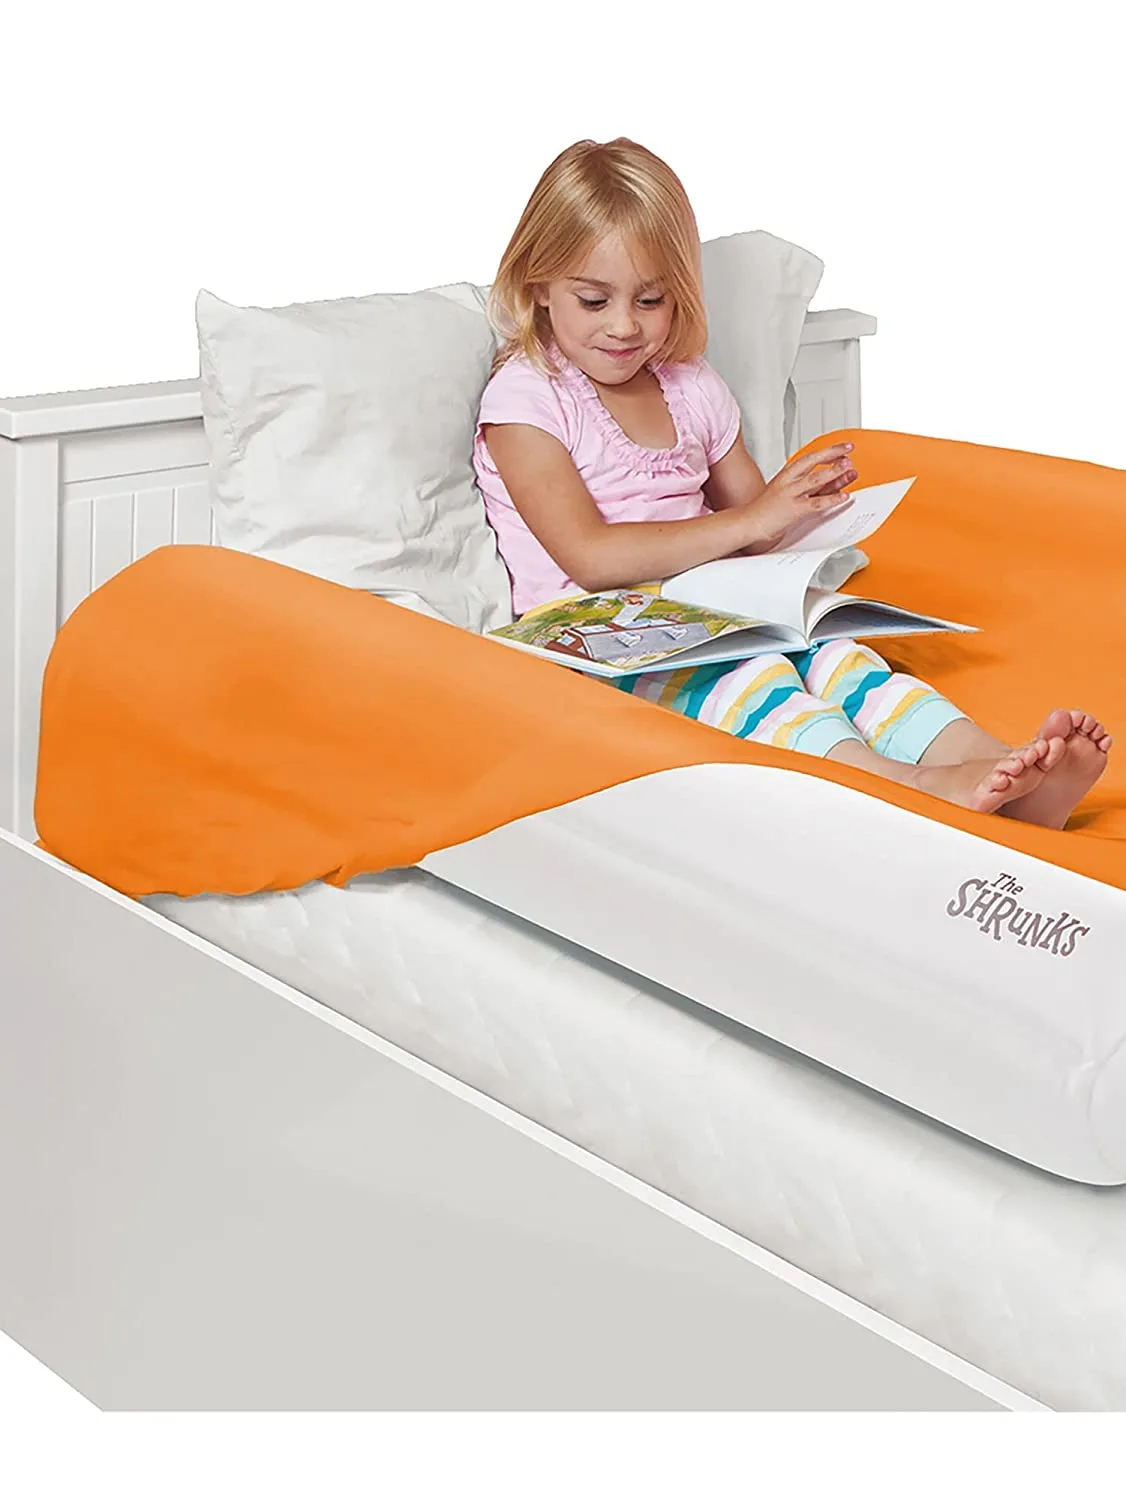 shrunks inflatable bed rails keep kids safe in bed when families travel.